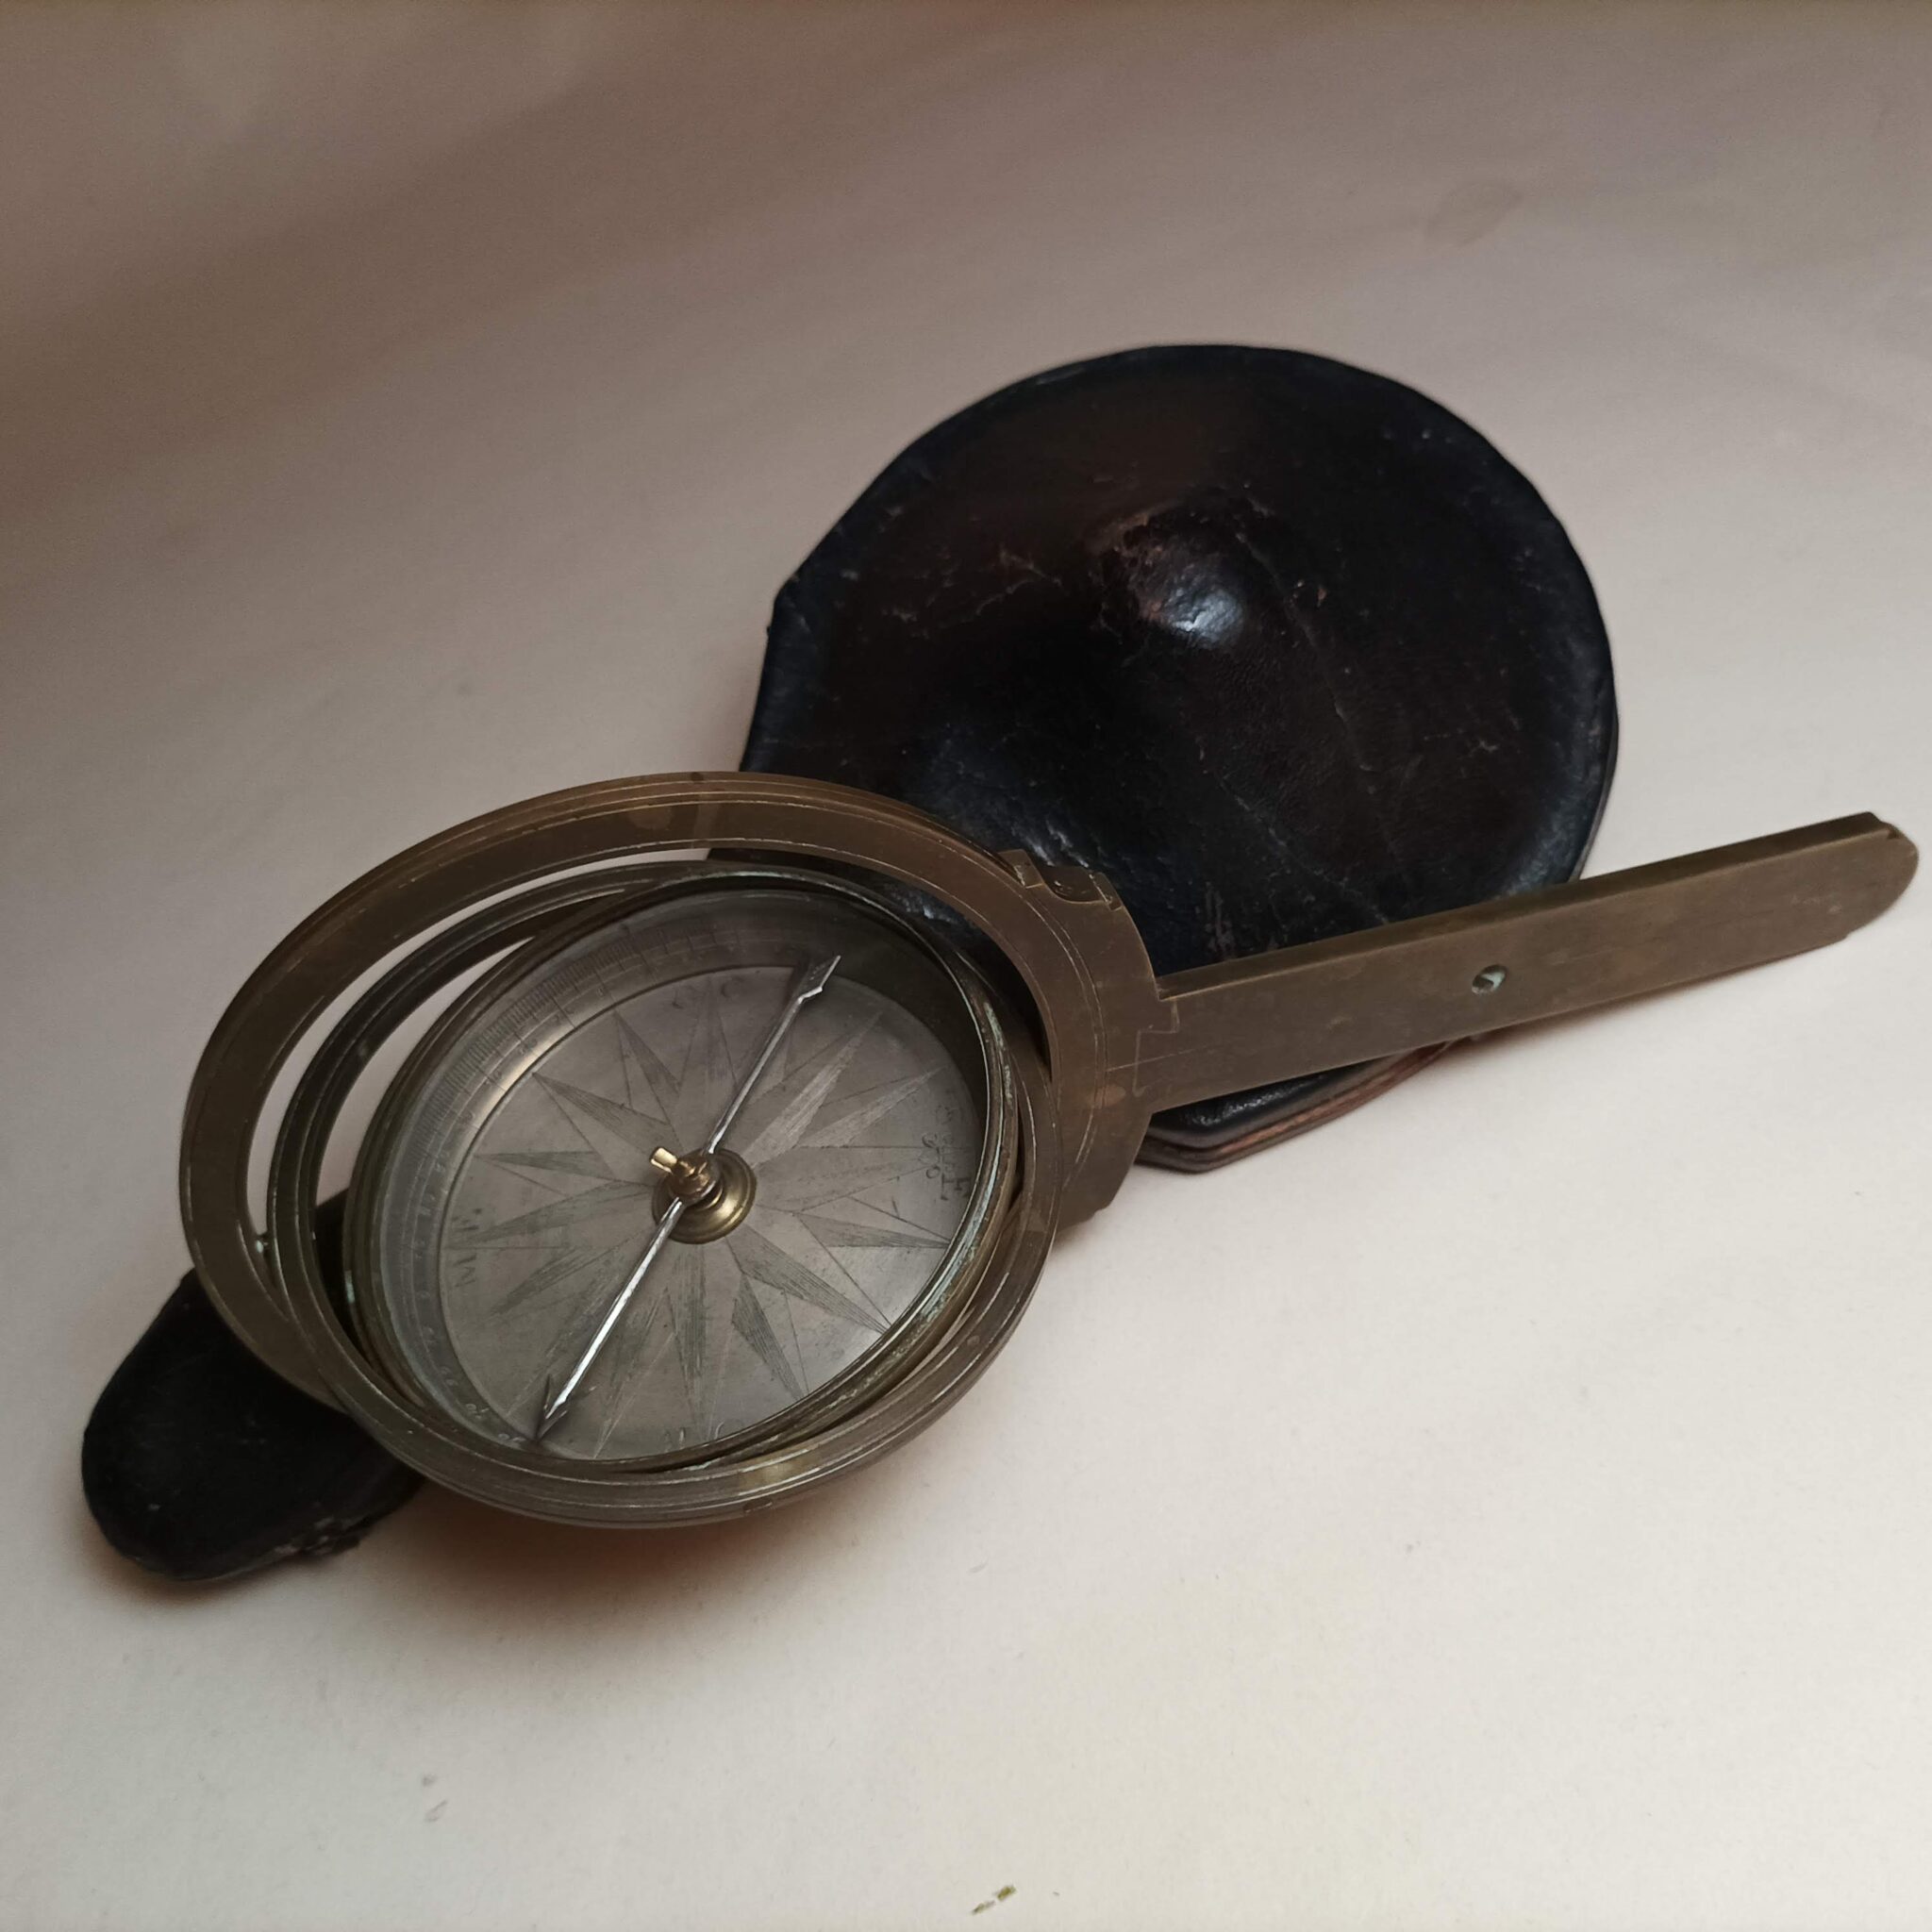 EARLY GIMBALLED PLANE TABLE COMPASS mid-18th